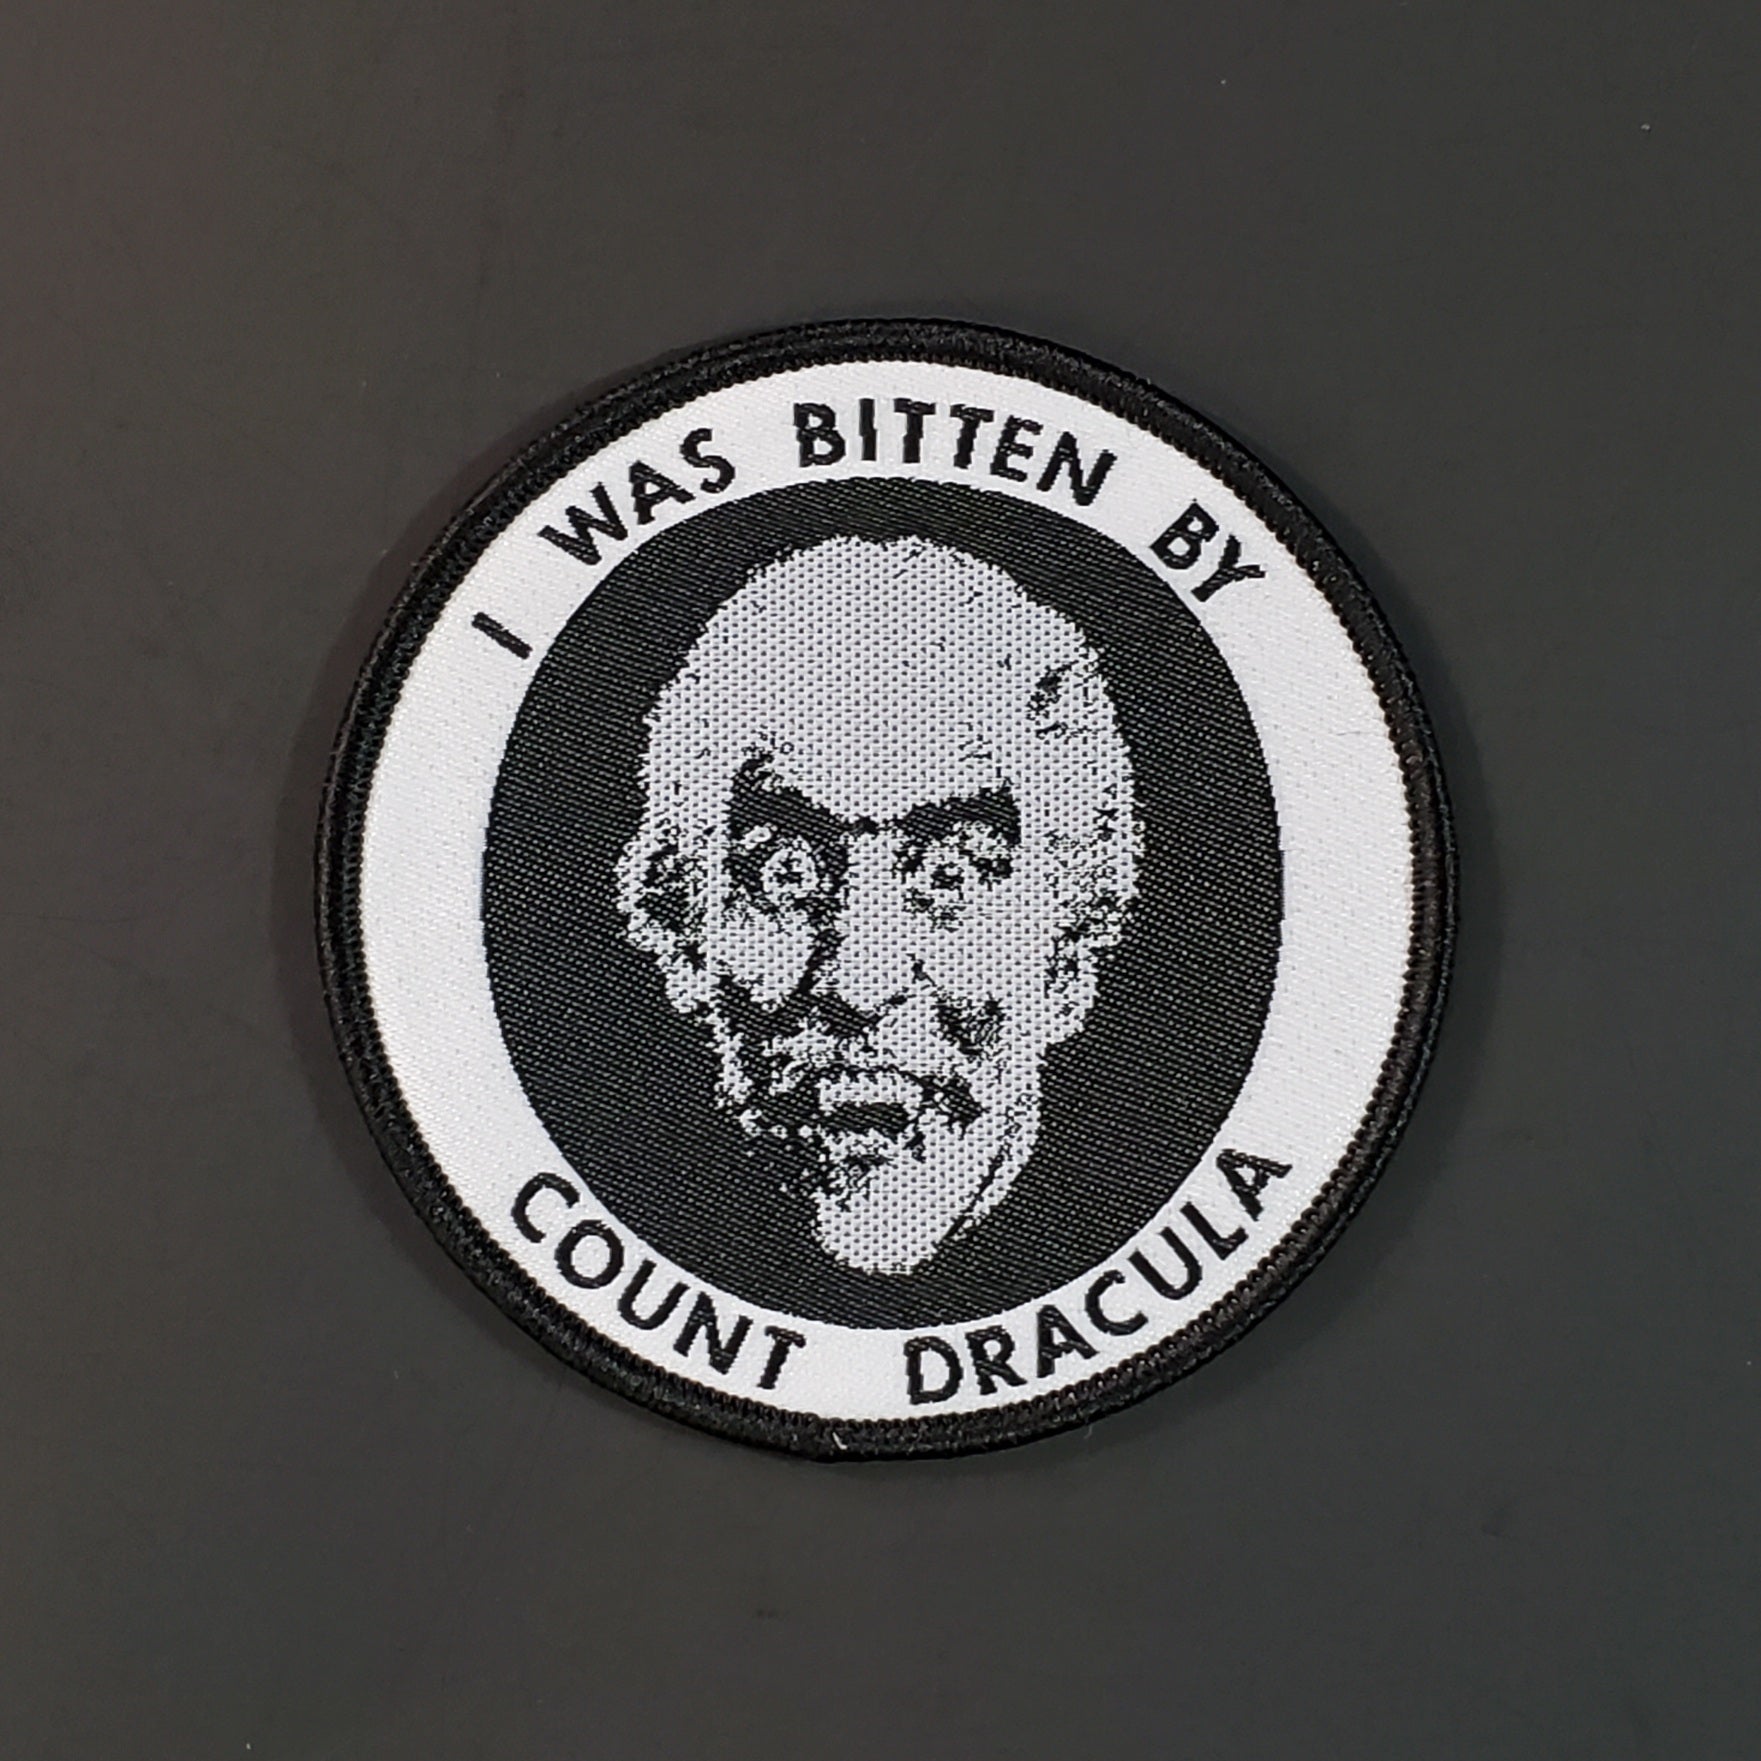 Woven black, white, and grey round patch with embroidered black border and illustration of vampire with “I WAS BITTEN BY COUNT DRACULA” written around it